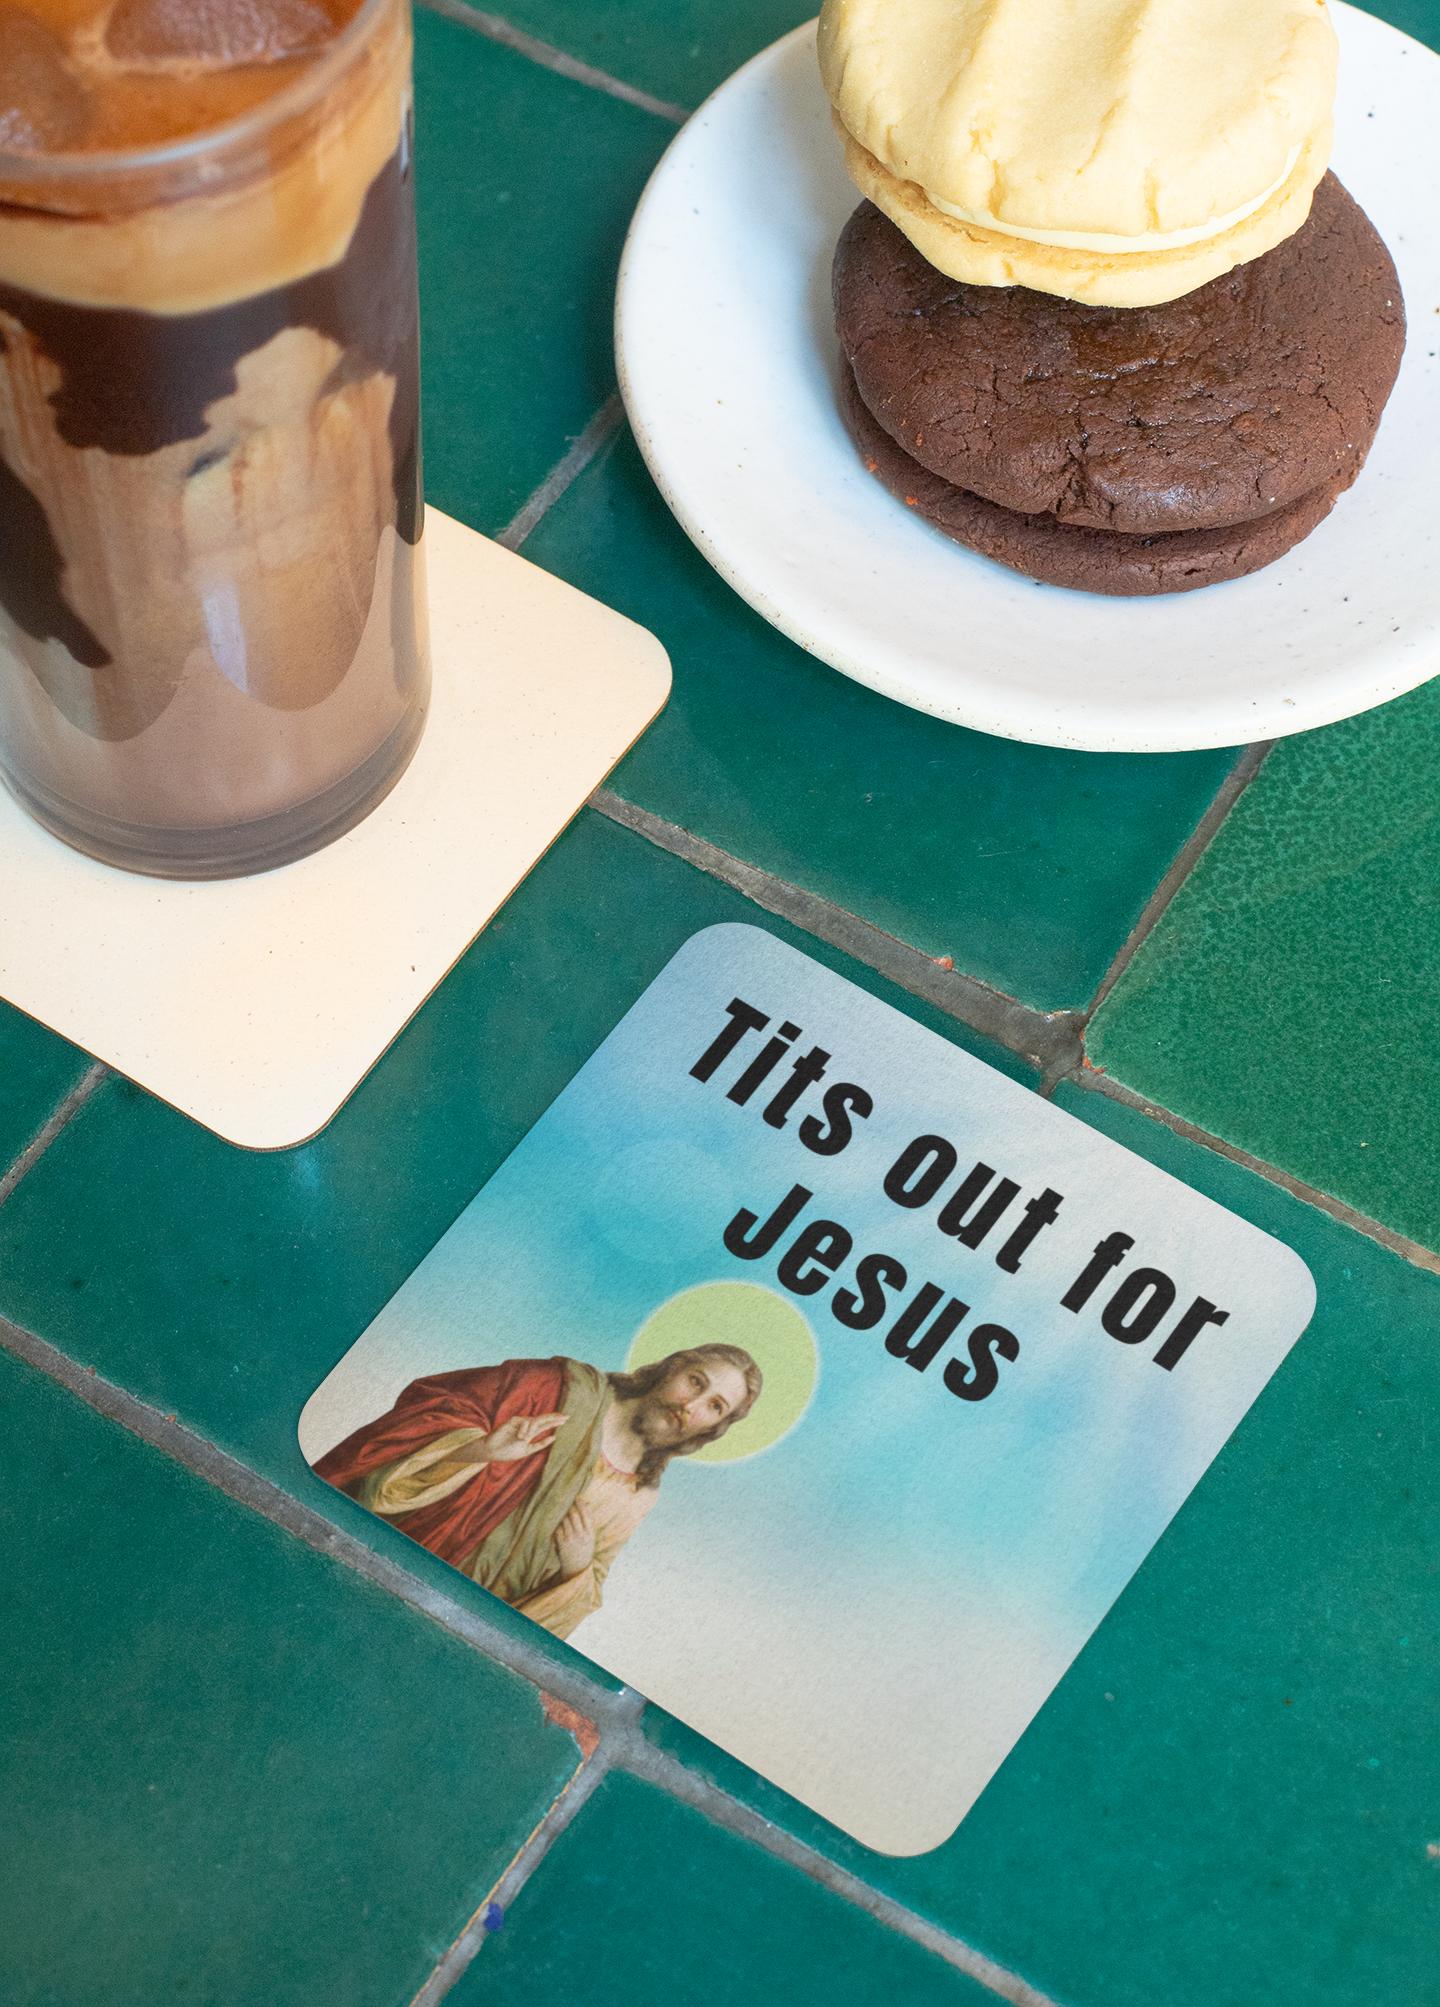 Tits out for Jesus Drink coaster co-worker gift coaster coaster set funny coaster jesus meme stocking stuffer